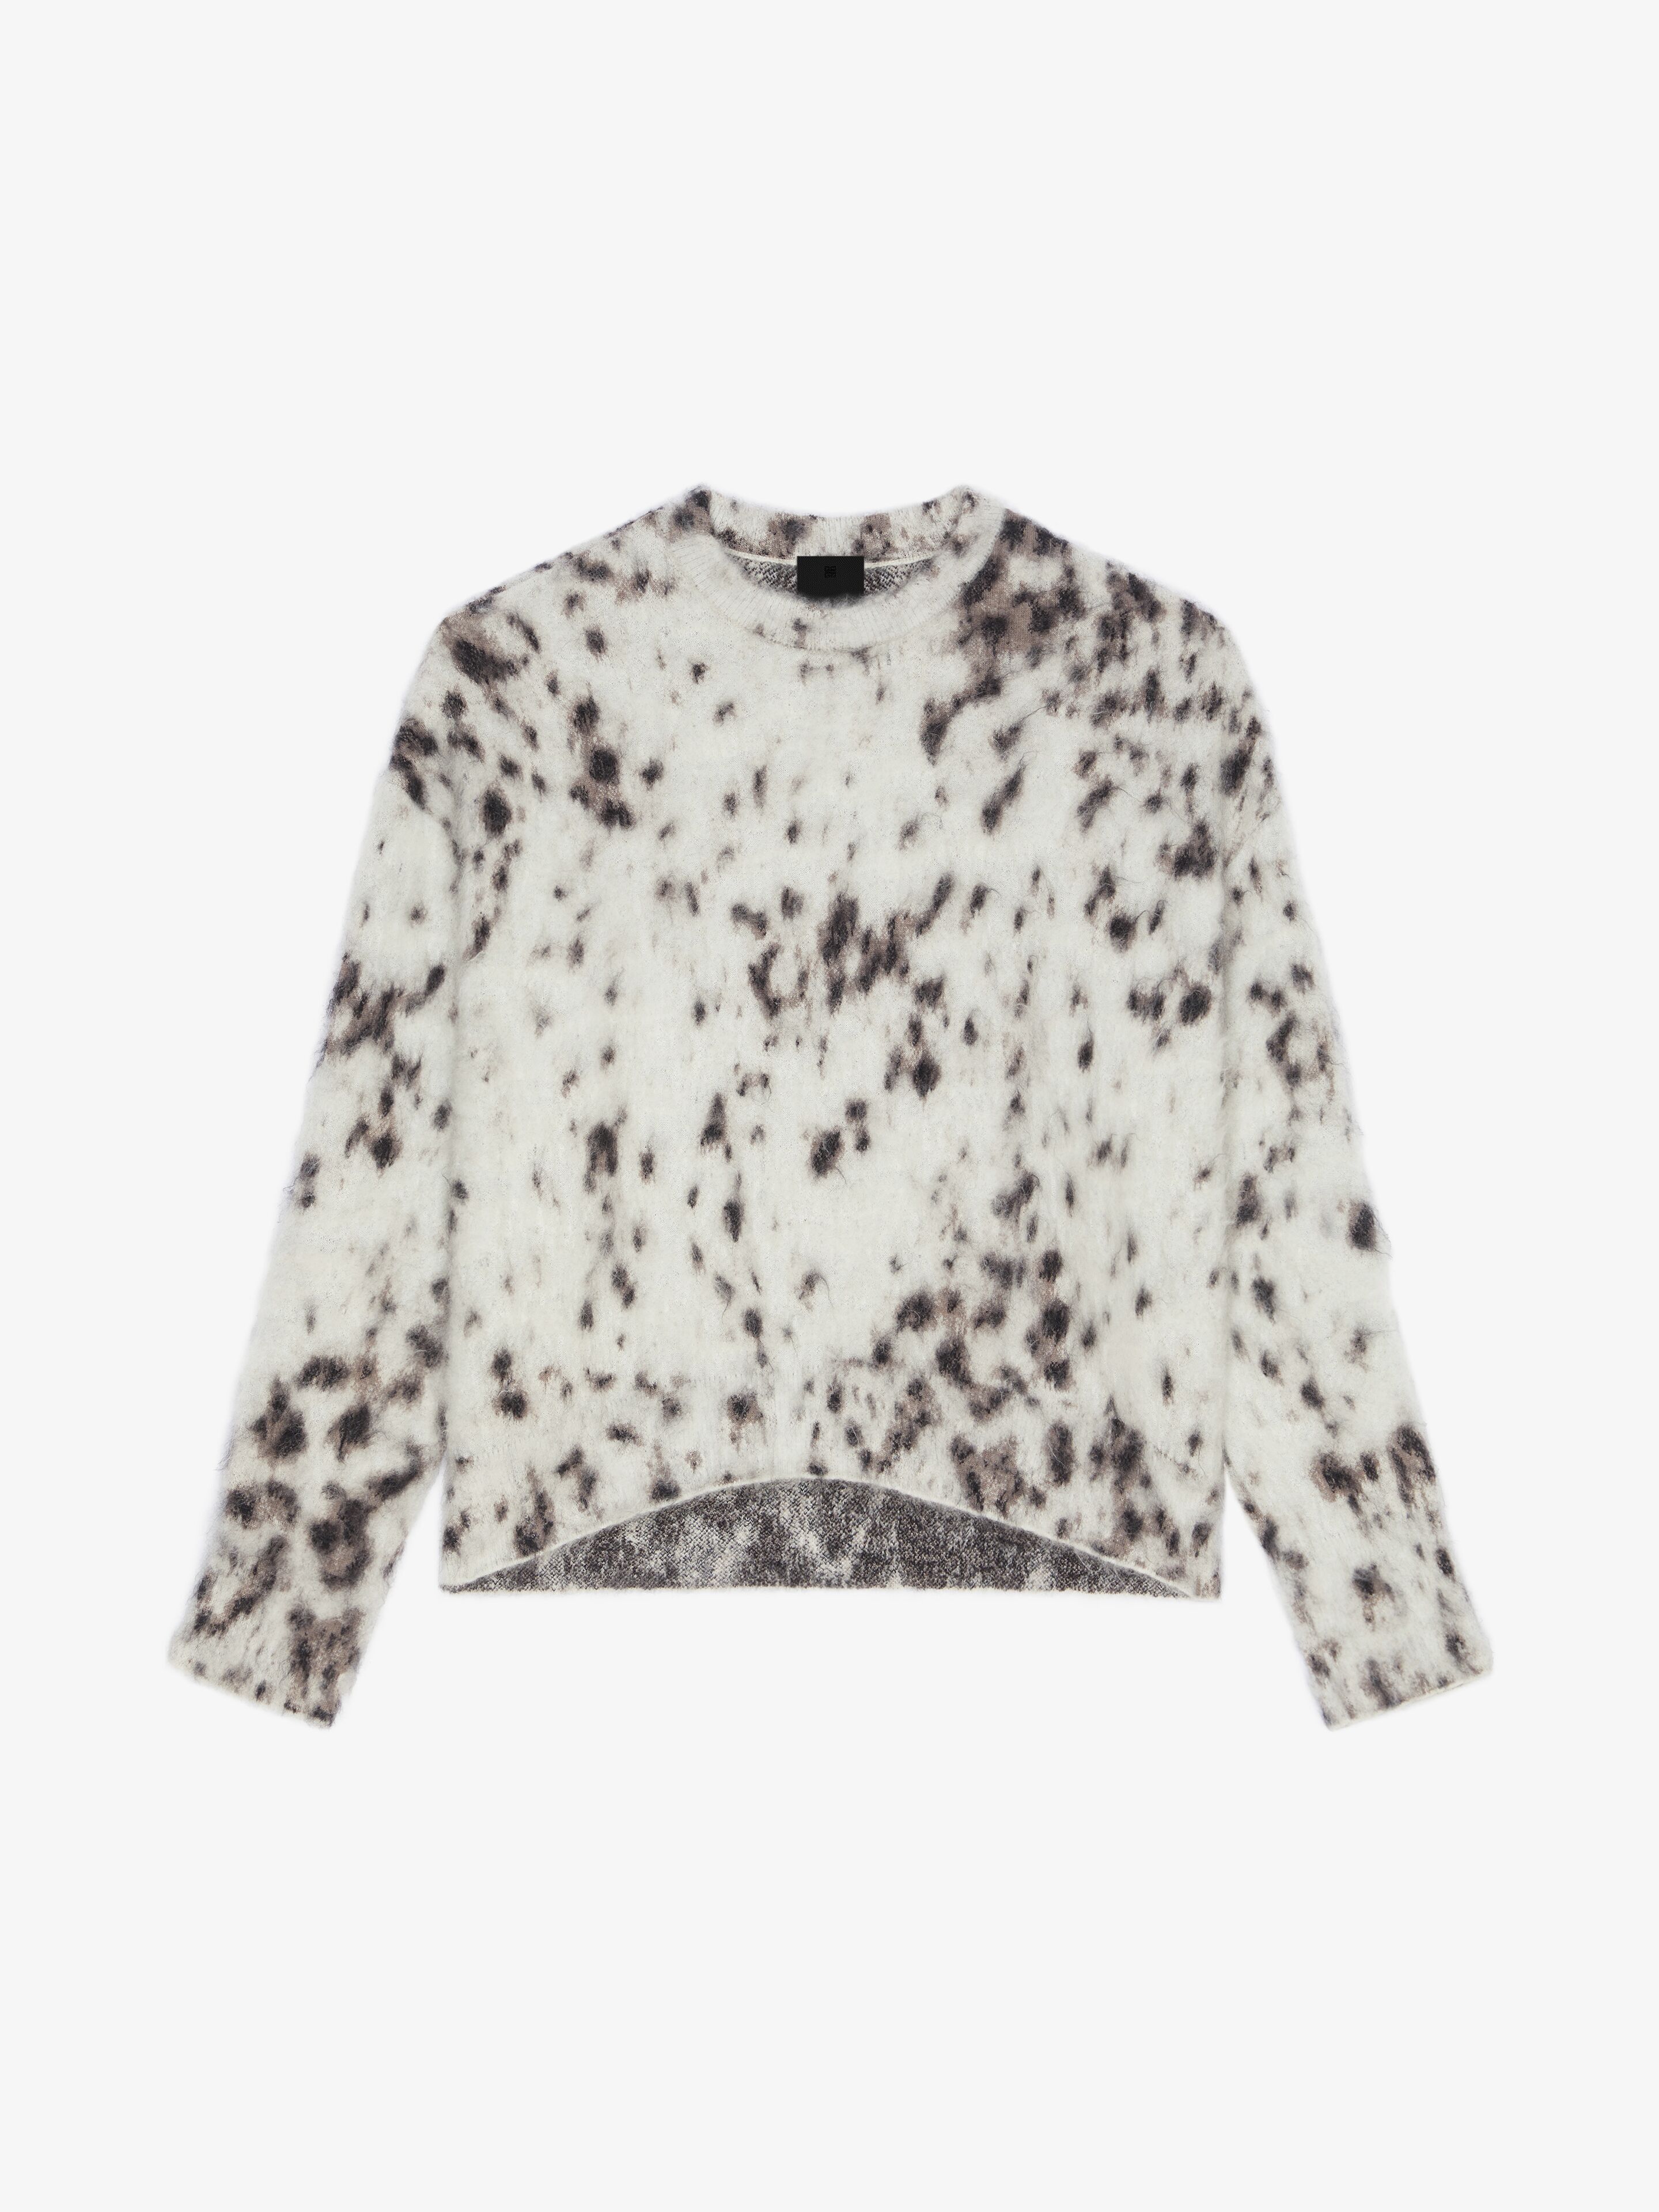 Givenchy Women's Cropped Sweater In Mohair With Snow Leopard Print In Beige/black